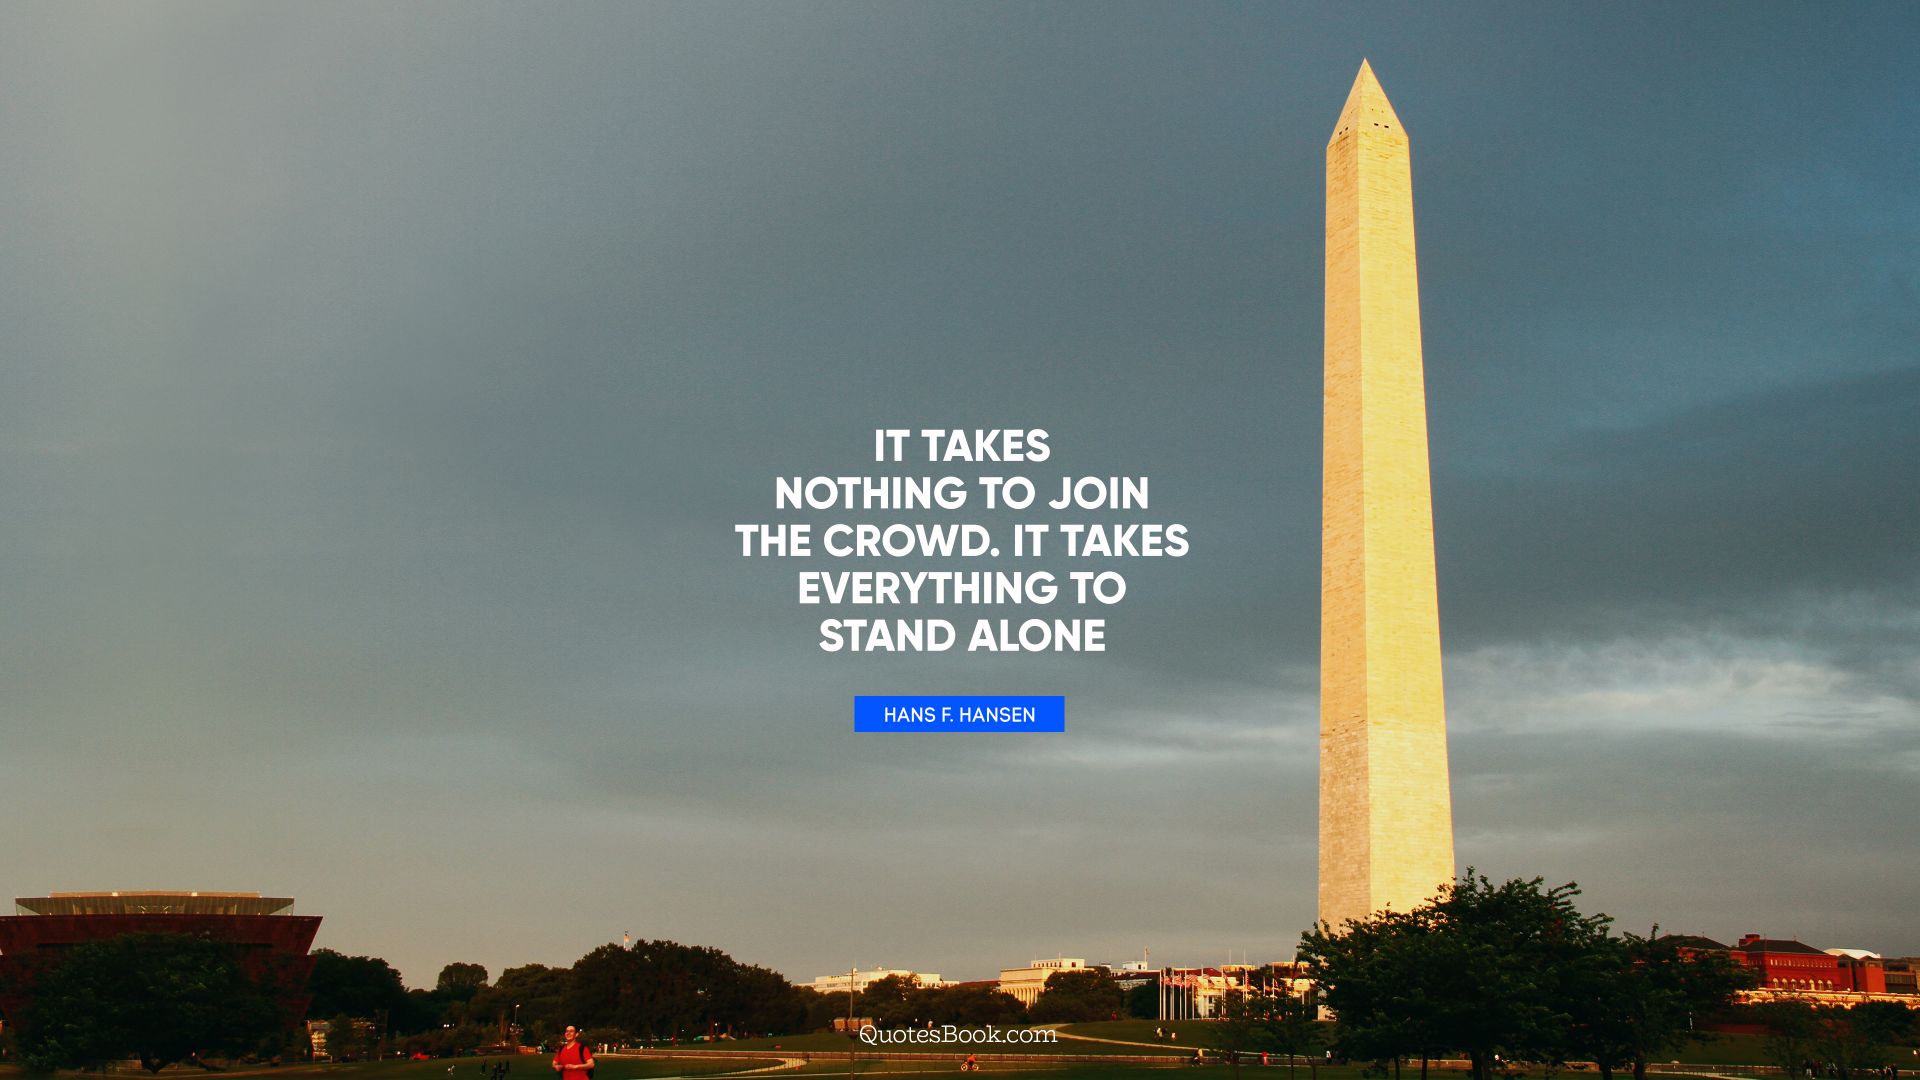 It takes nothing to join the crowd. It takes everything to stand alone. - Quote by Hans F. Hansen